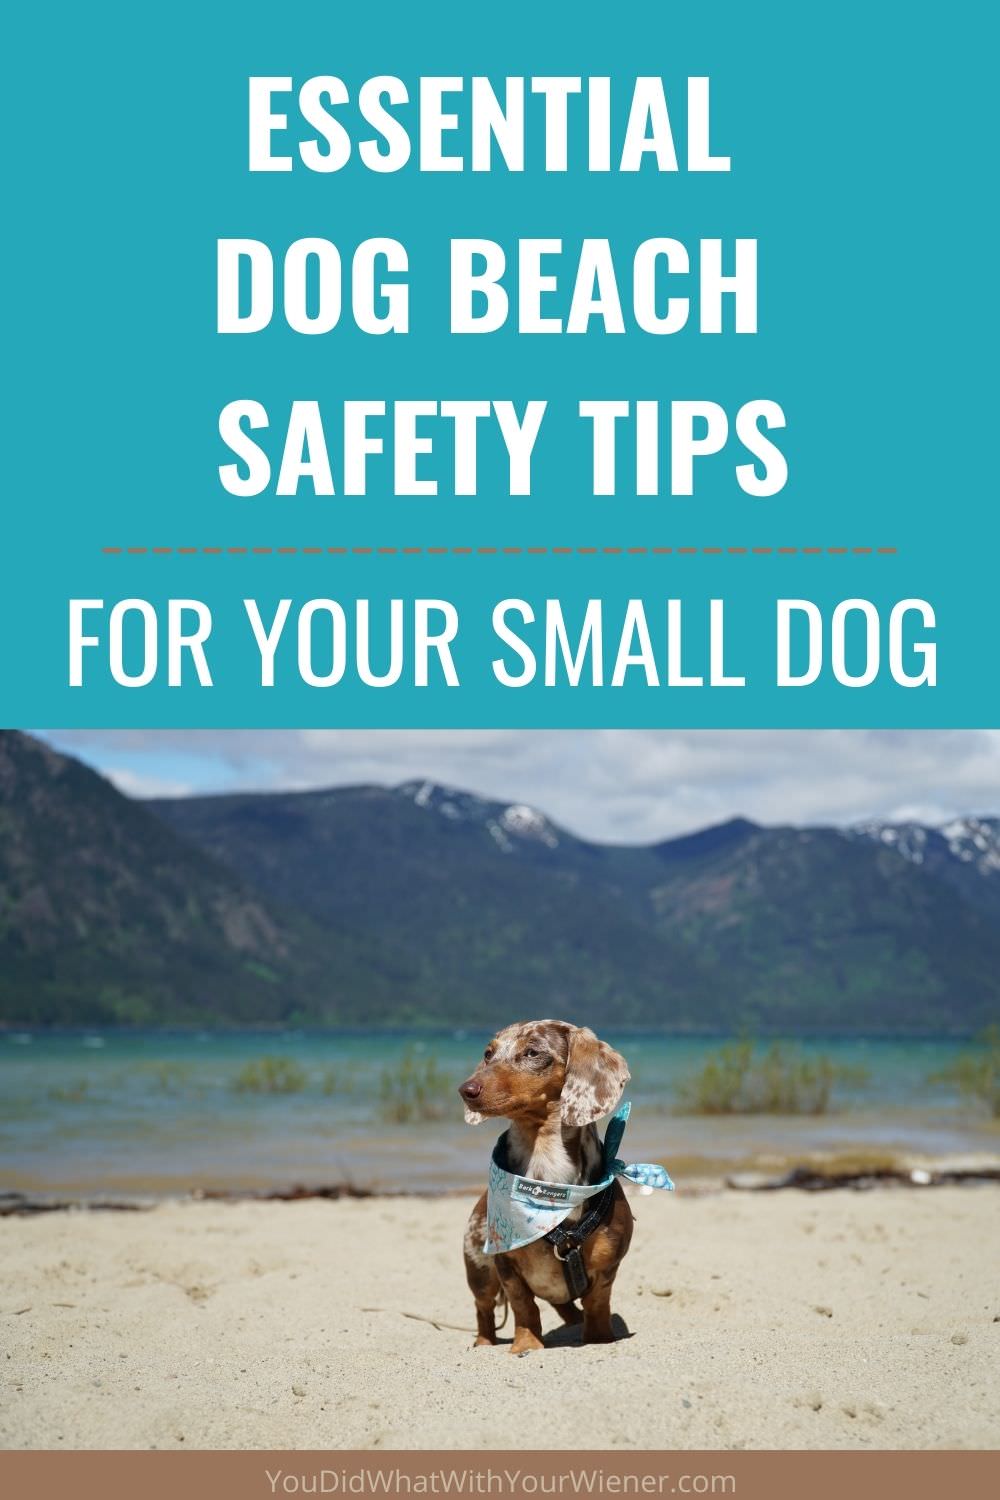 Headed to the beach with your dog this summer? Here are essential dog beach safety tips for your small dog that you'll want to know.